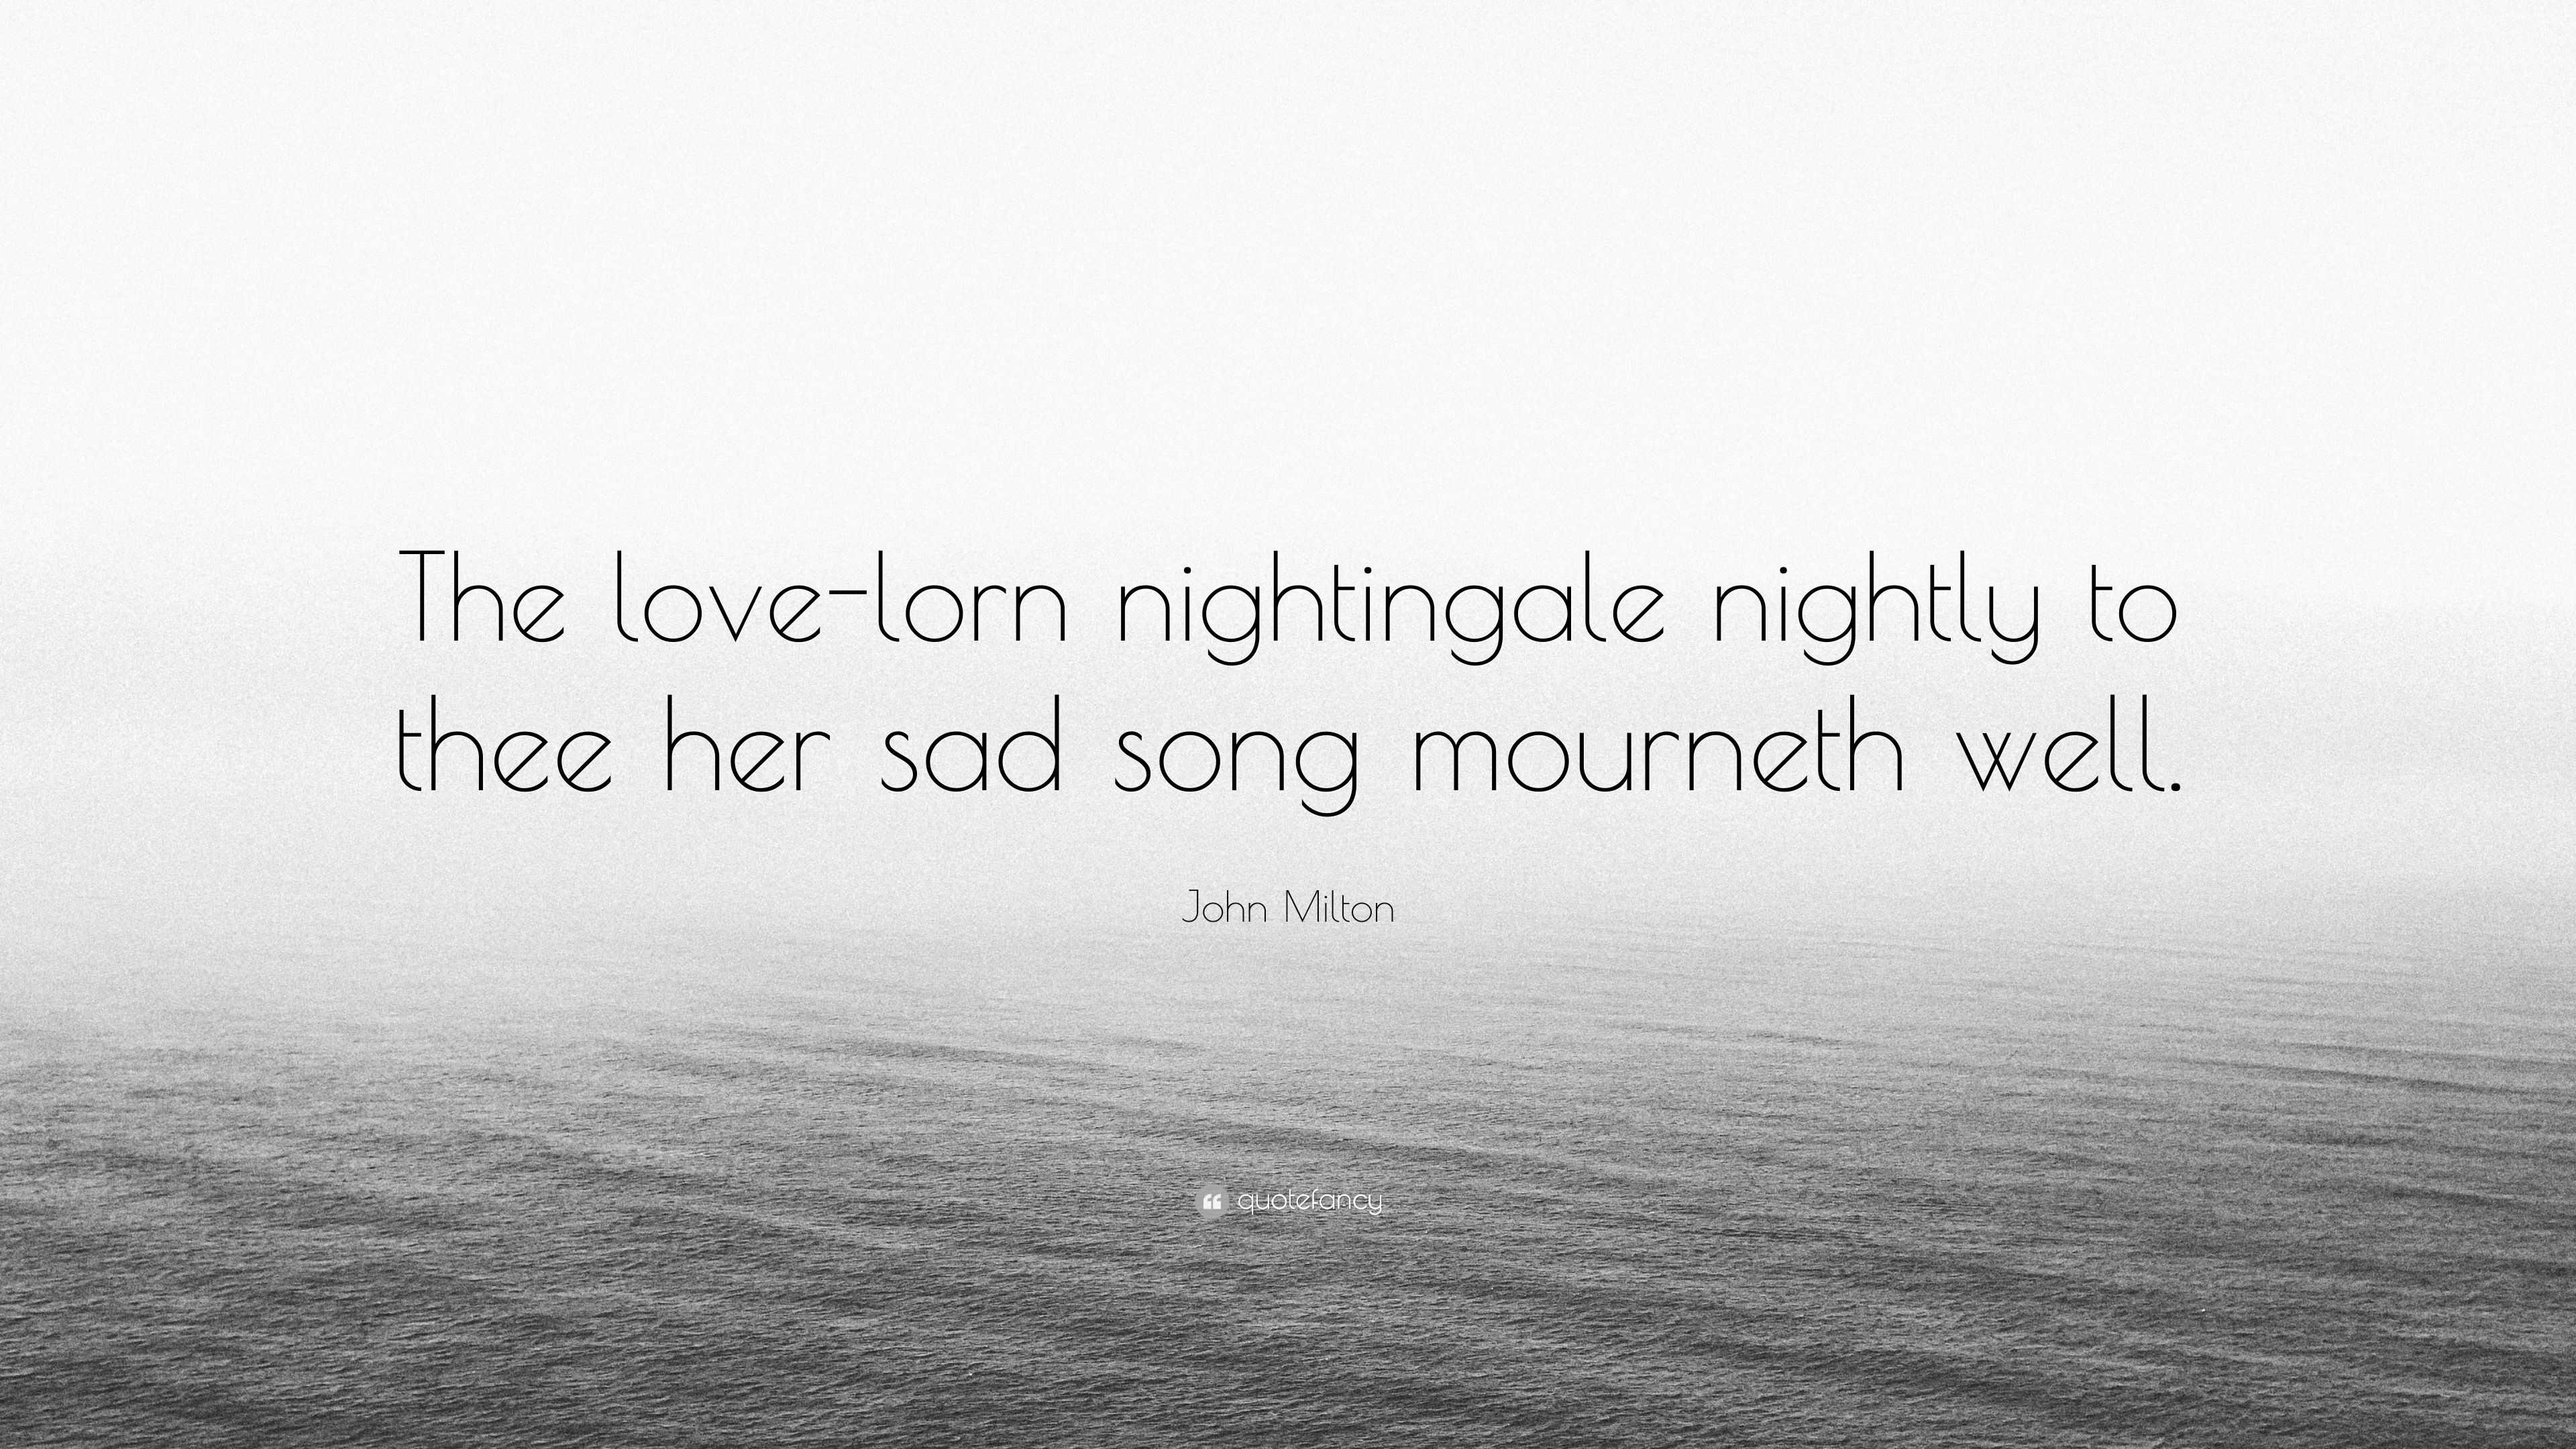 John Milton Quote The Love Lorn Nightingale Nightly To Thee Her